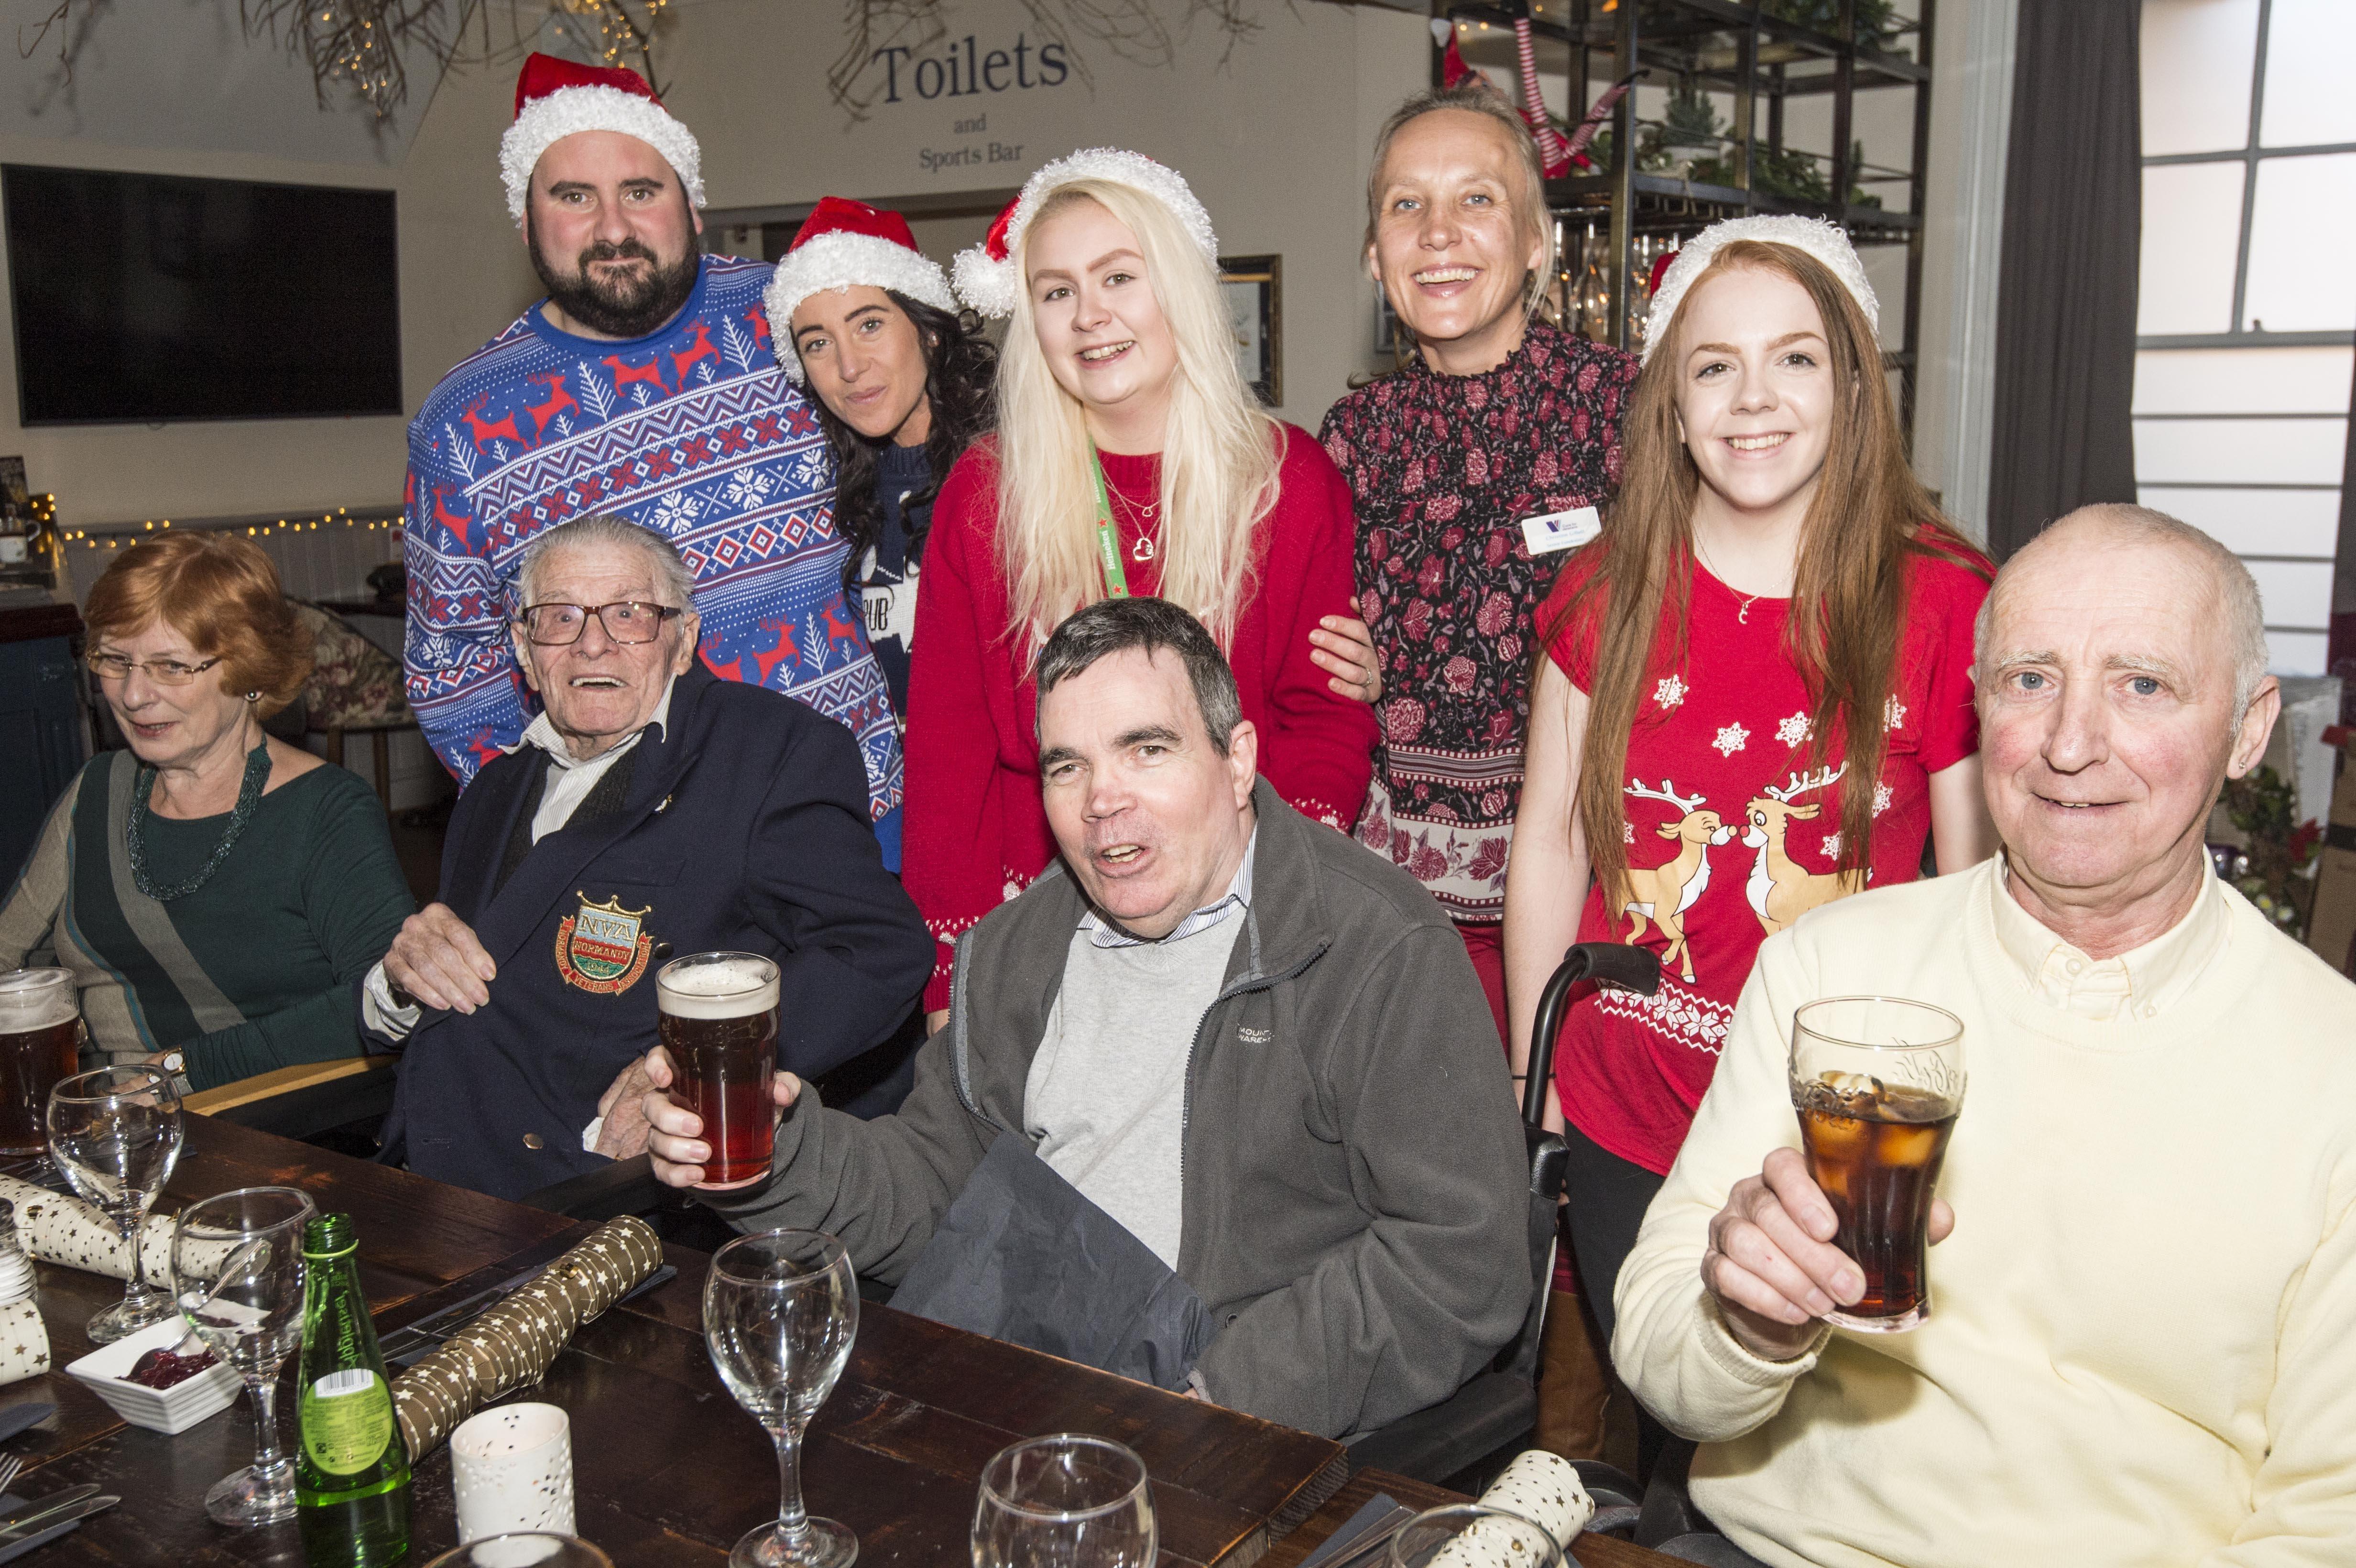 Care for Veterans residents enjoyed Christmas lunch at The Park View pub in Worthing as part of Heineken’s Brewing Good Cheer campaign